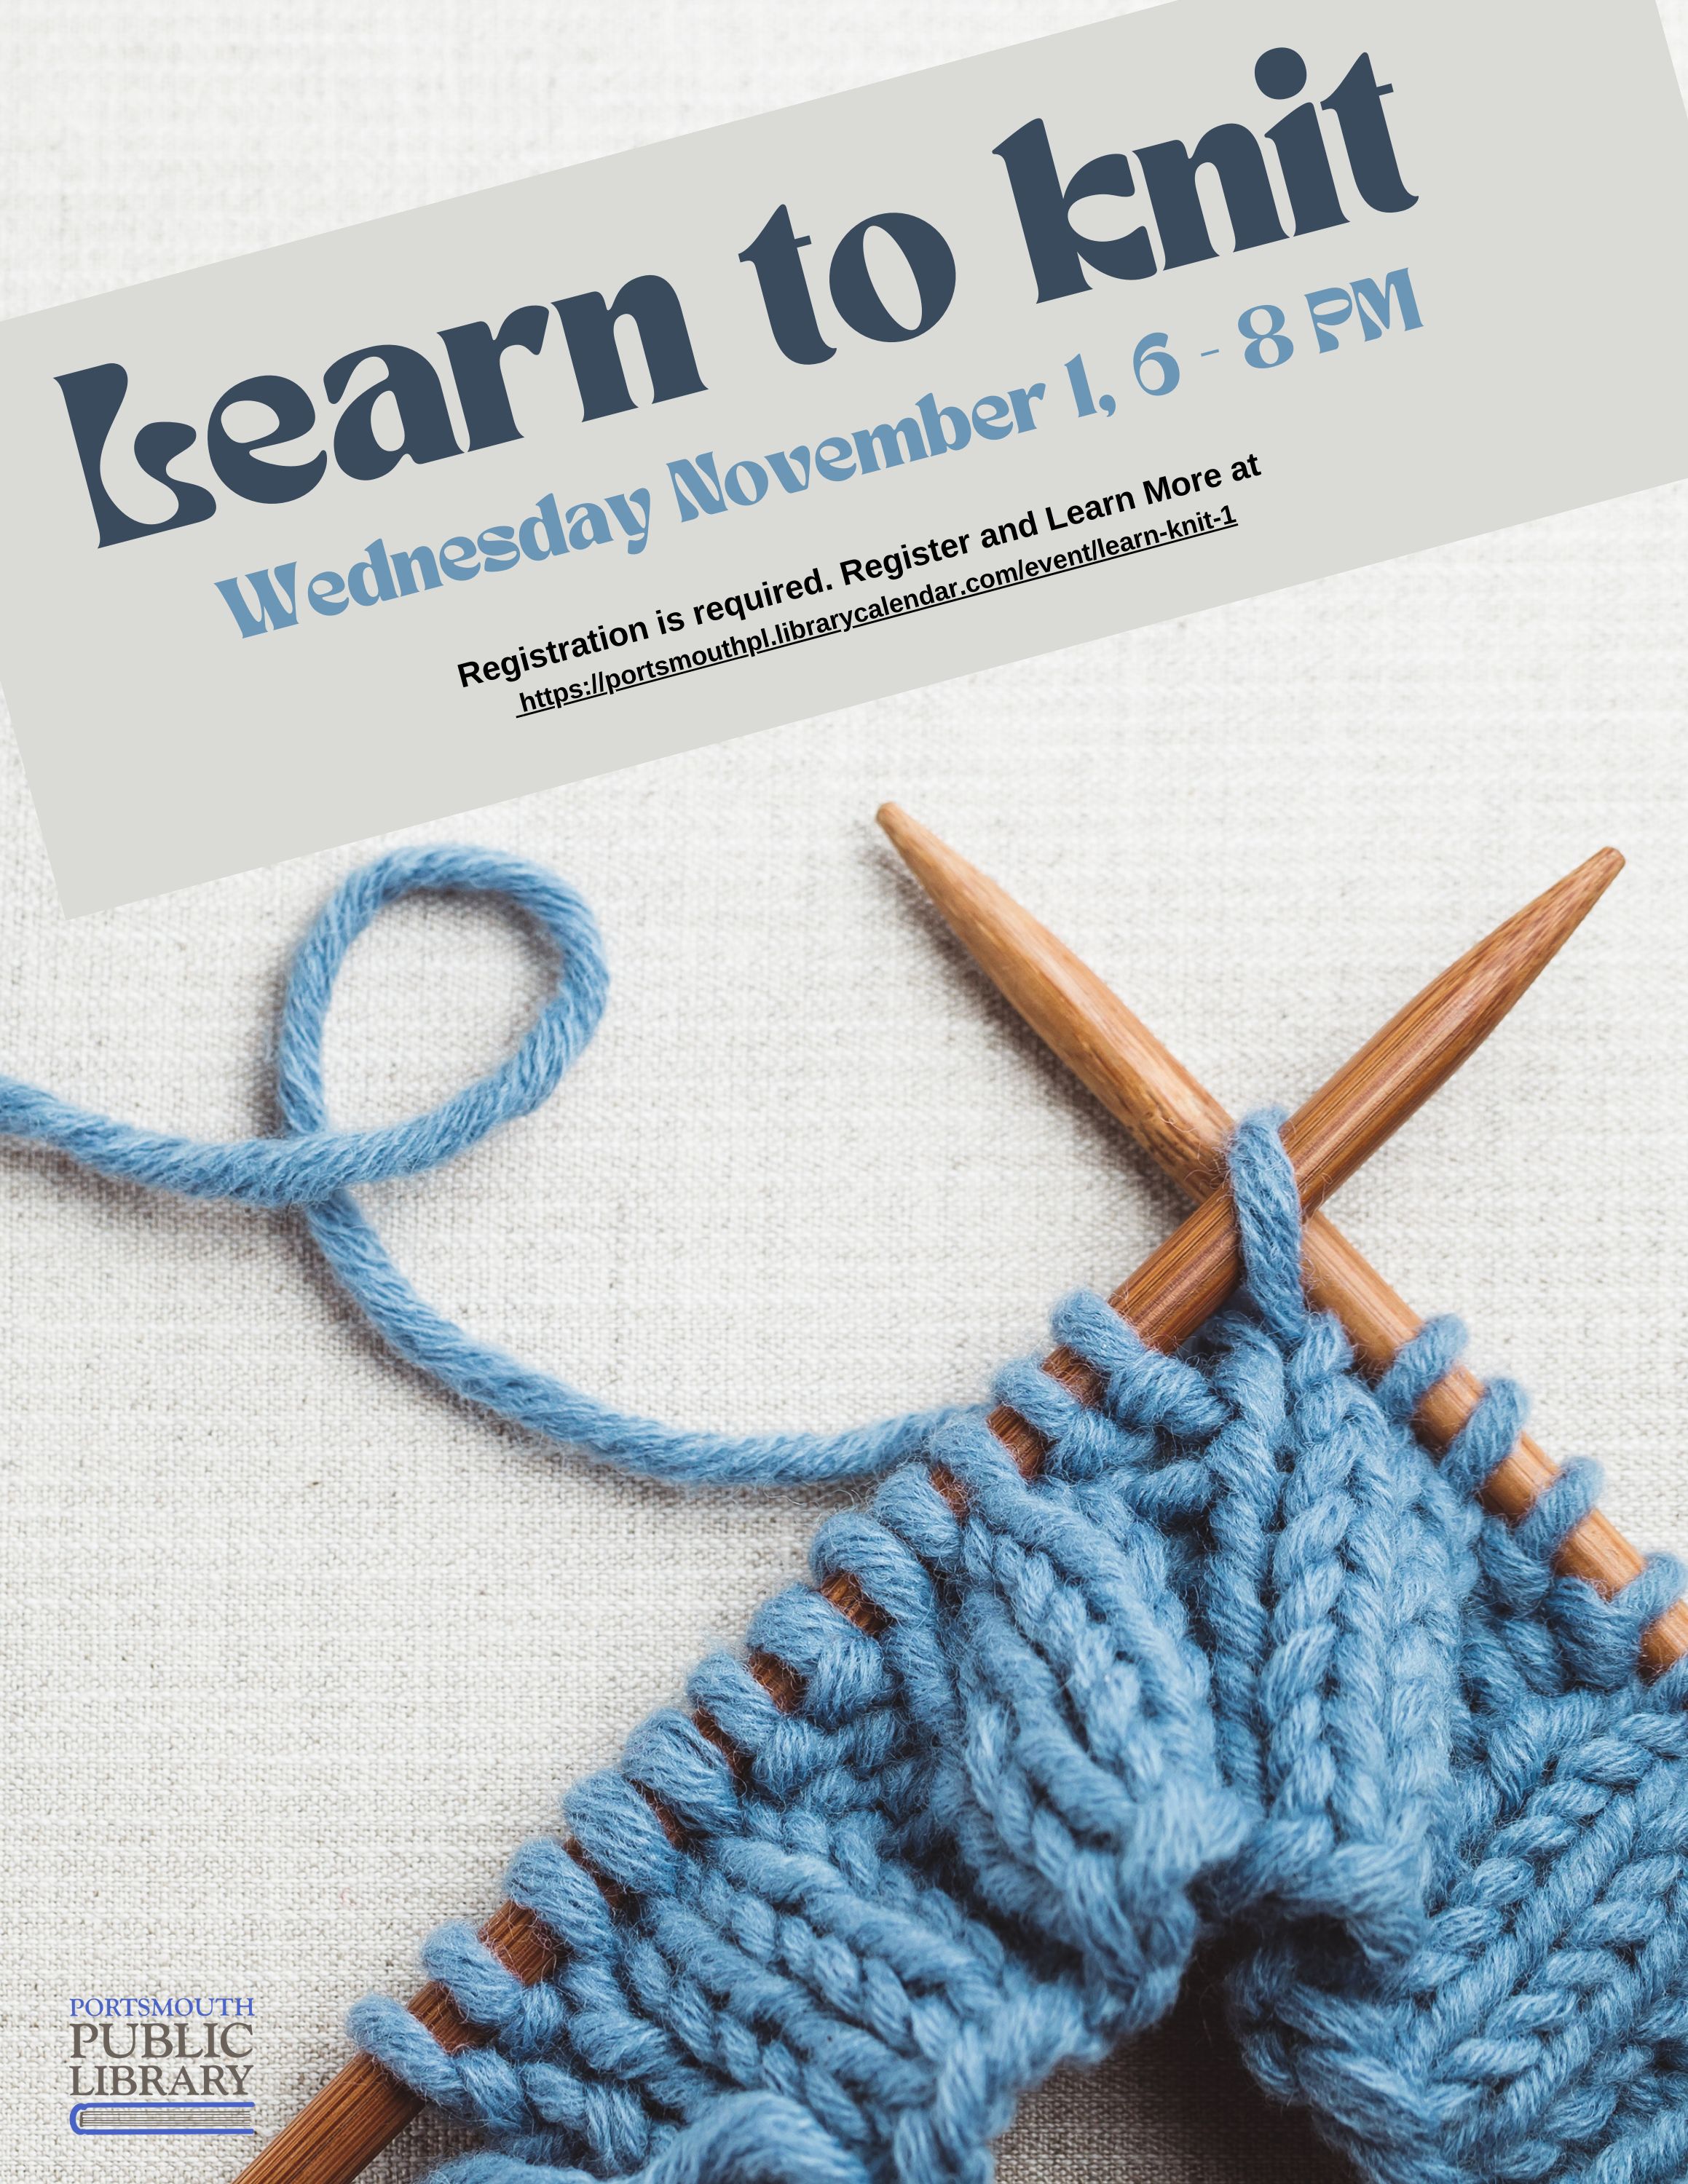 Learn to Knit Wednesday November 1 6-8 PM Registration is required. Knitting needles and blue yarn. Portsmouth Public Library